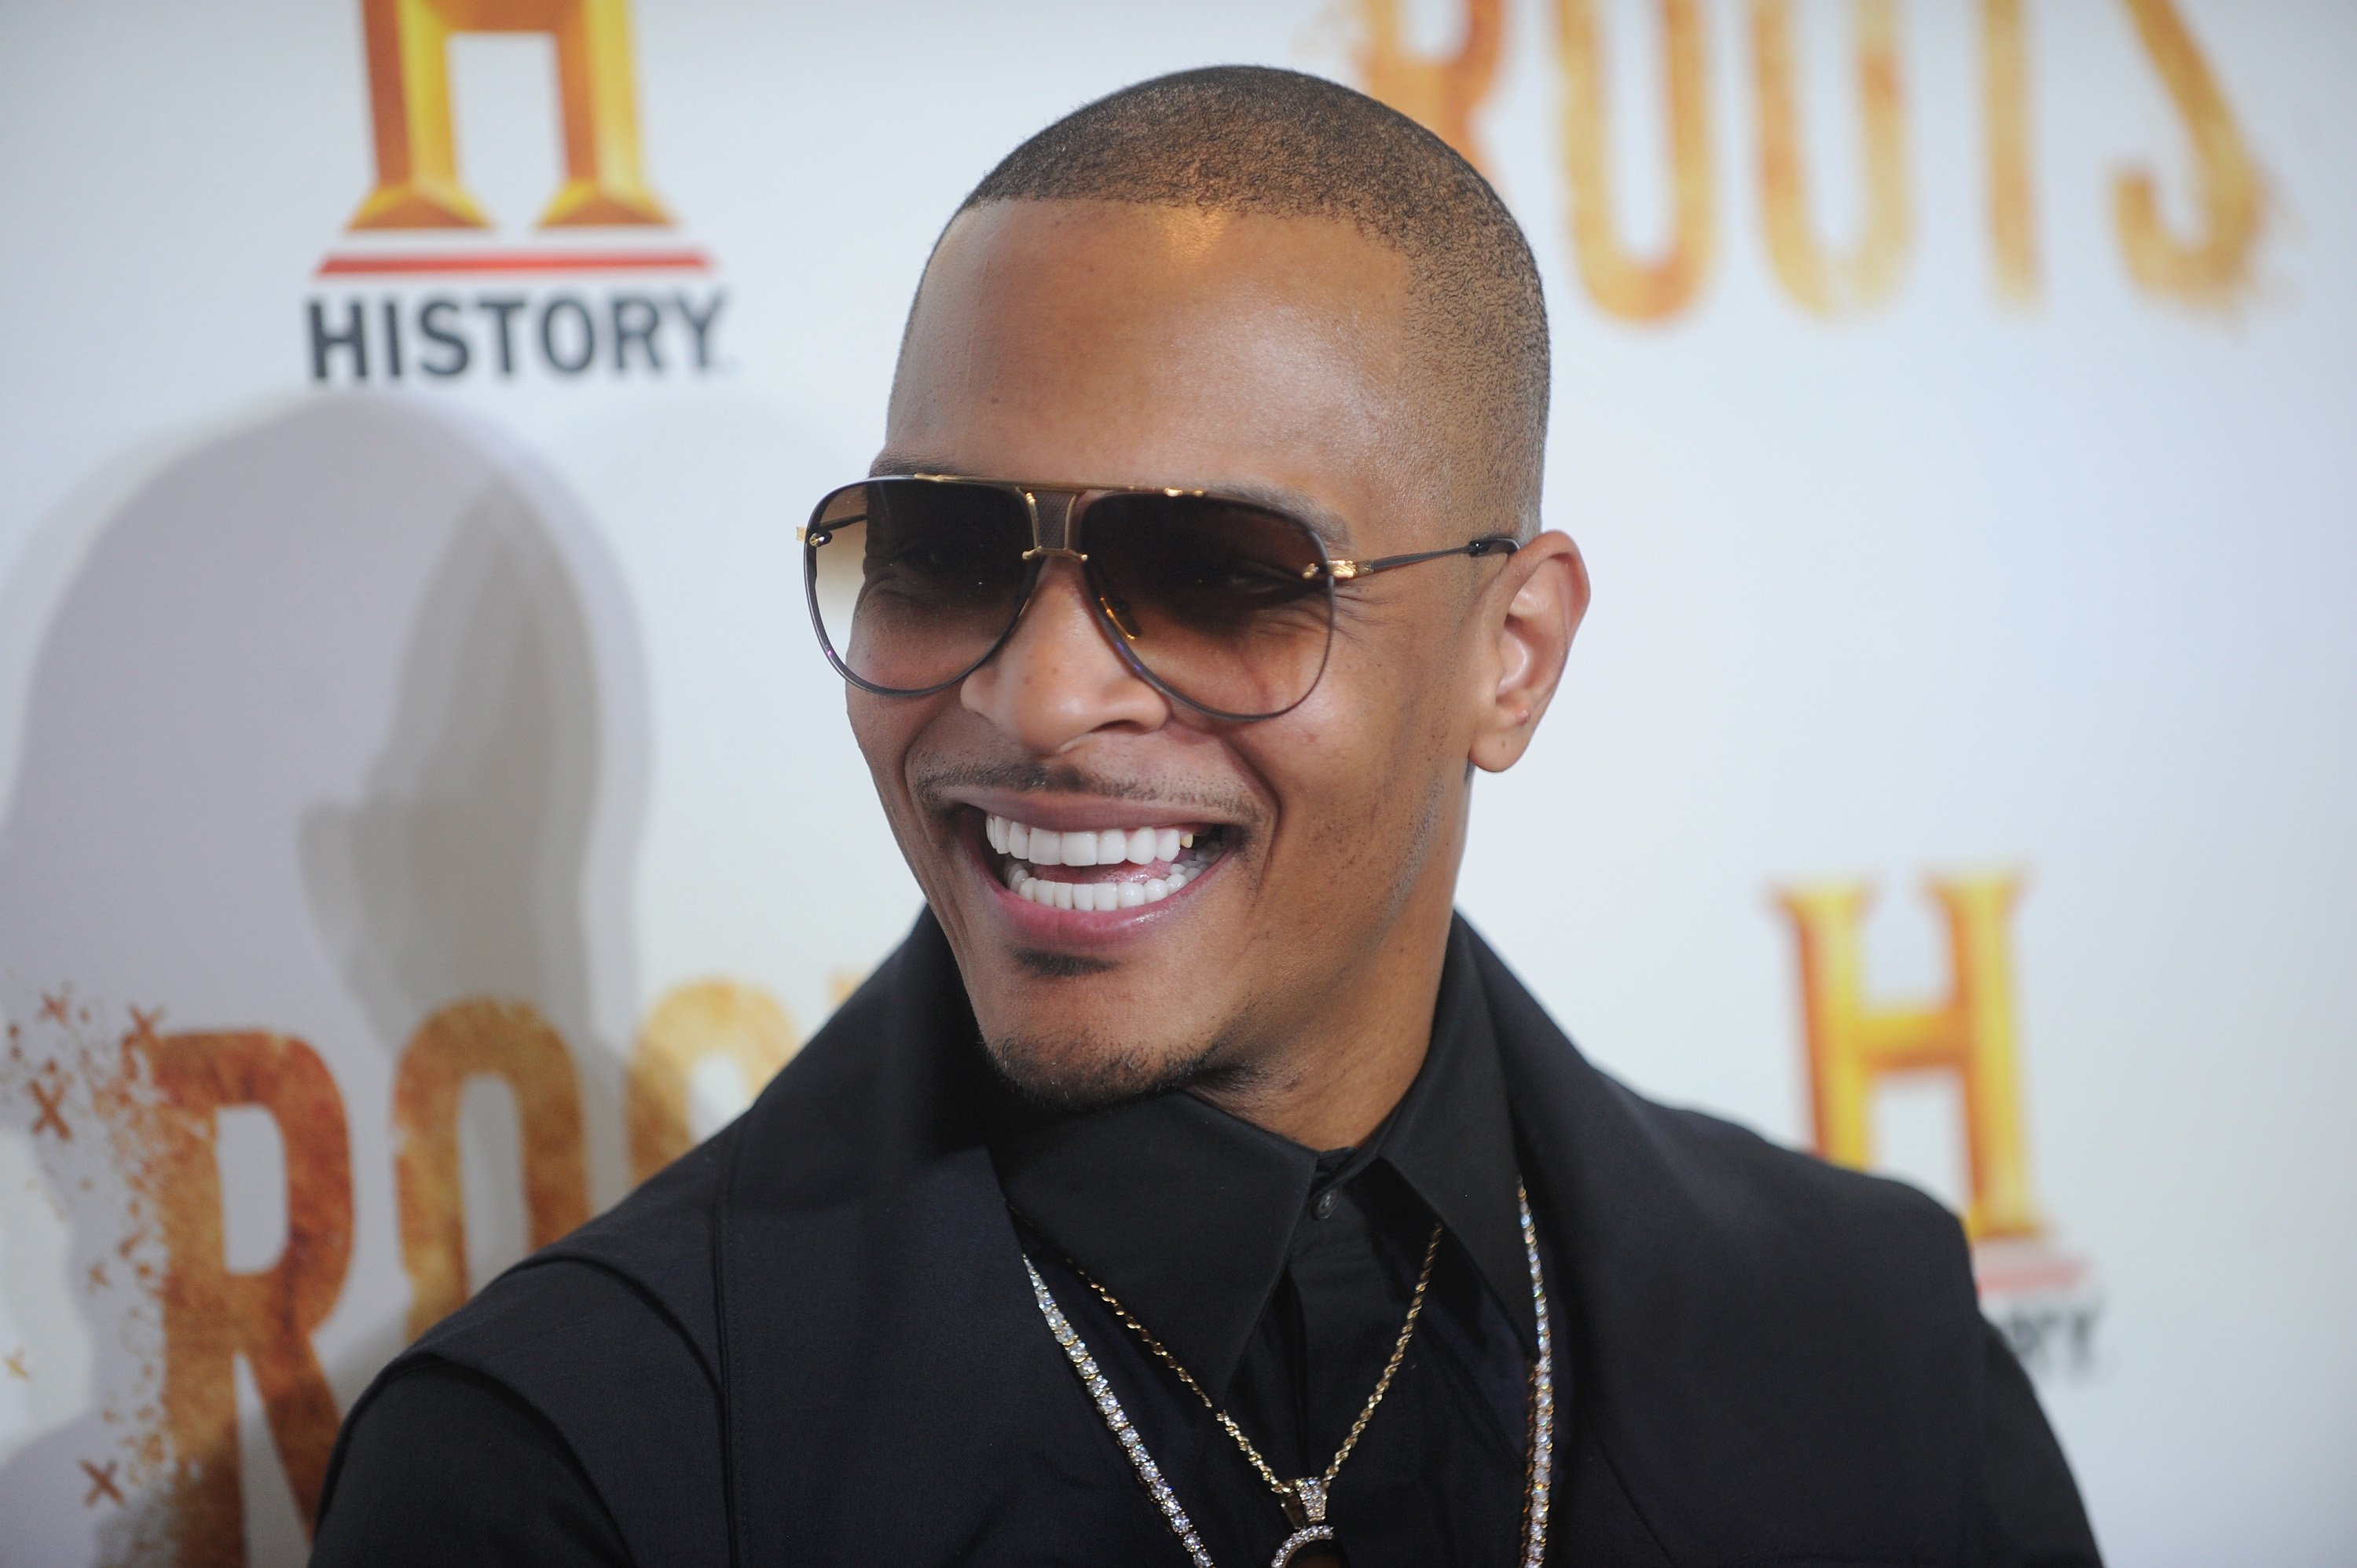 T.I. Harris at the premiere of "Night One" at Alice Tully Hall on May 23, 2016 | Photo: GettyImages